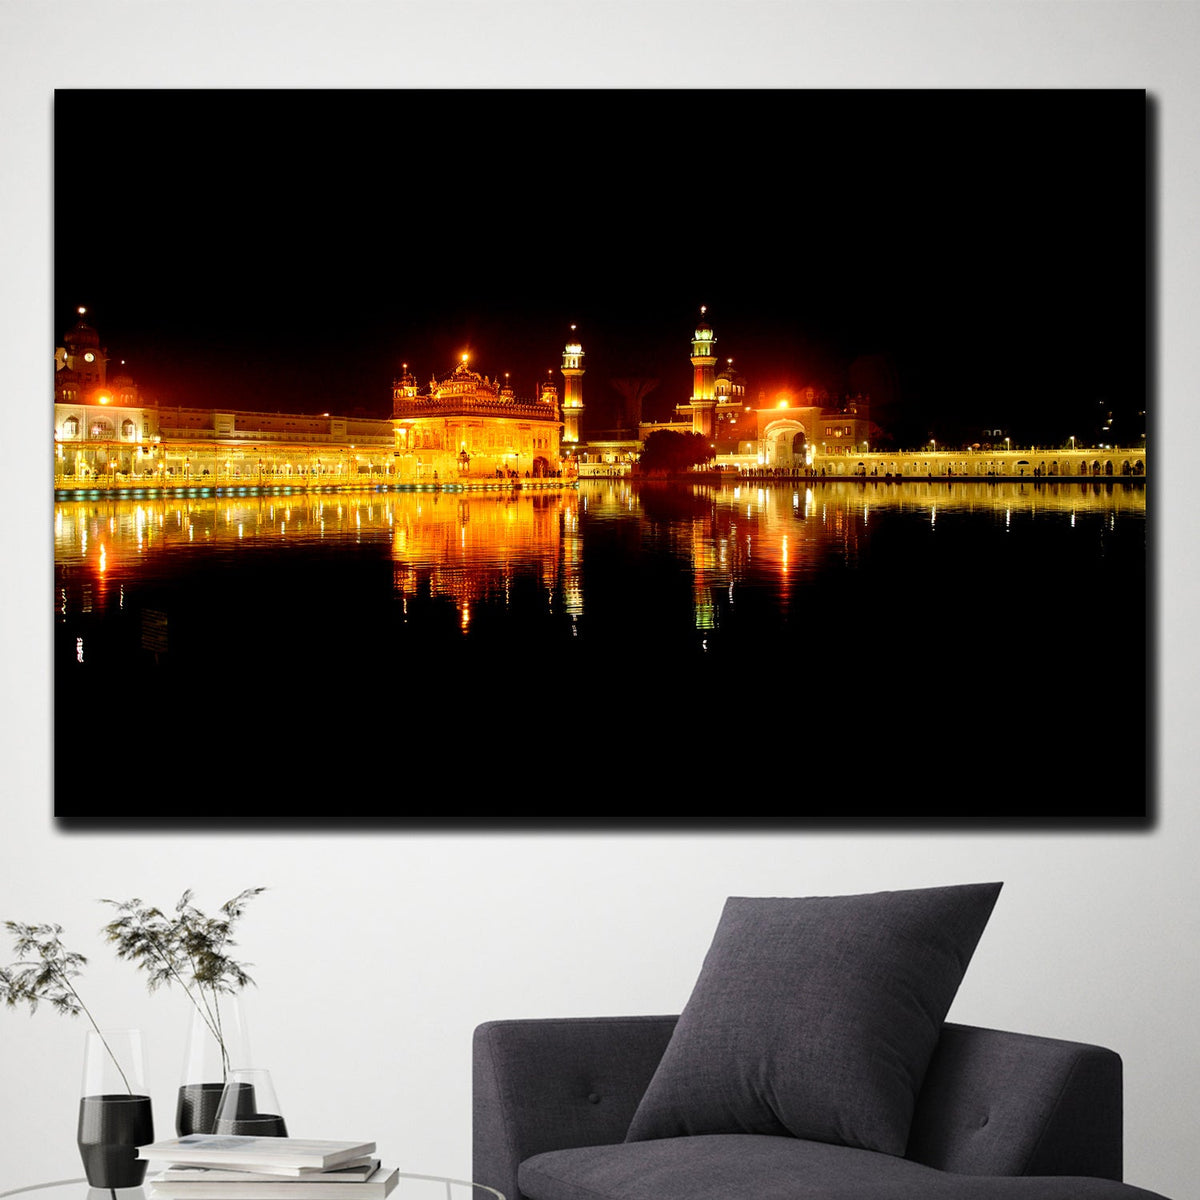 https://cdn.shopify.com/s/files/1/0387/9986/8044/products/TheIconicGoldenTempleCanvasArtprintStretched-2.jpg